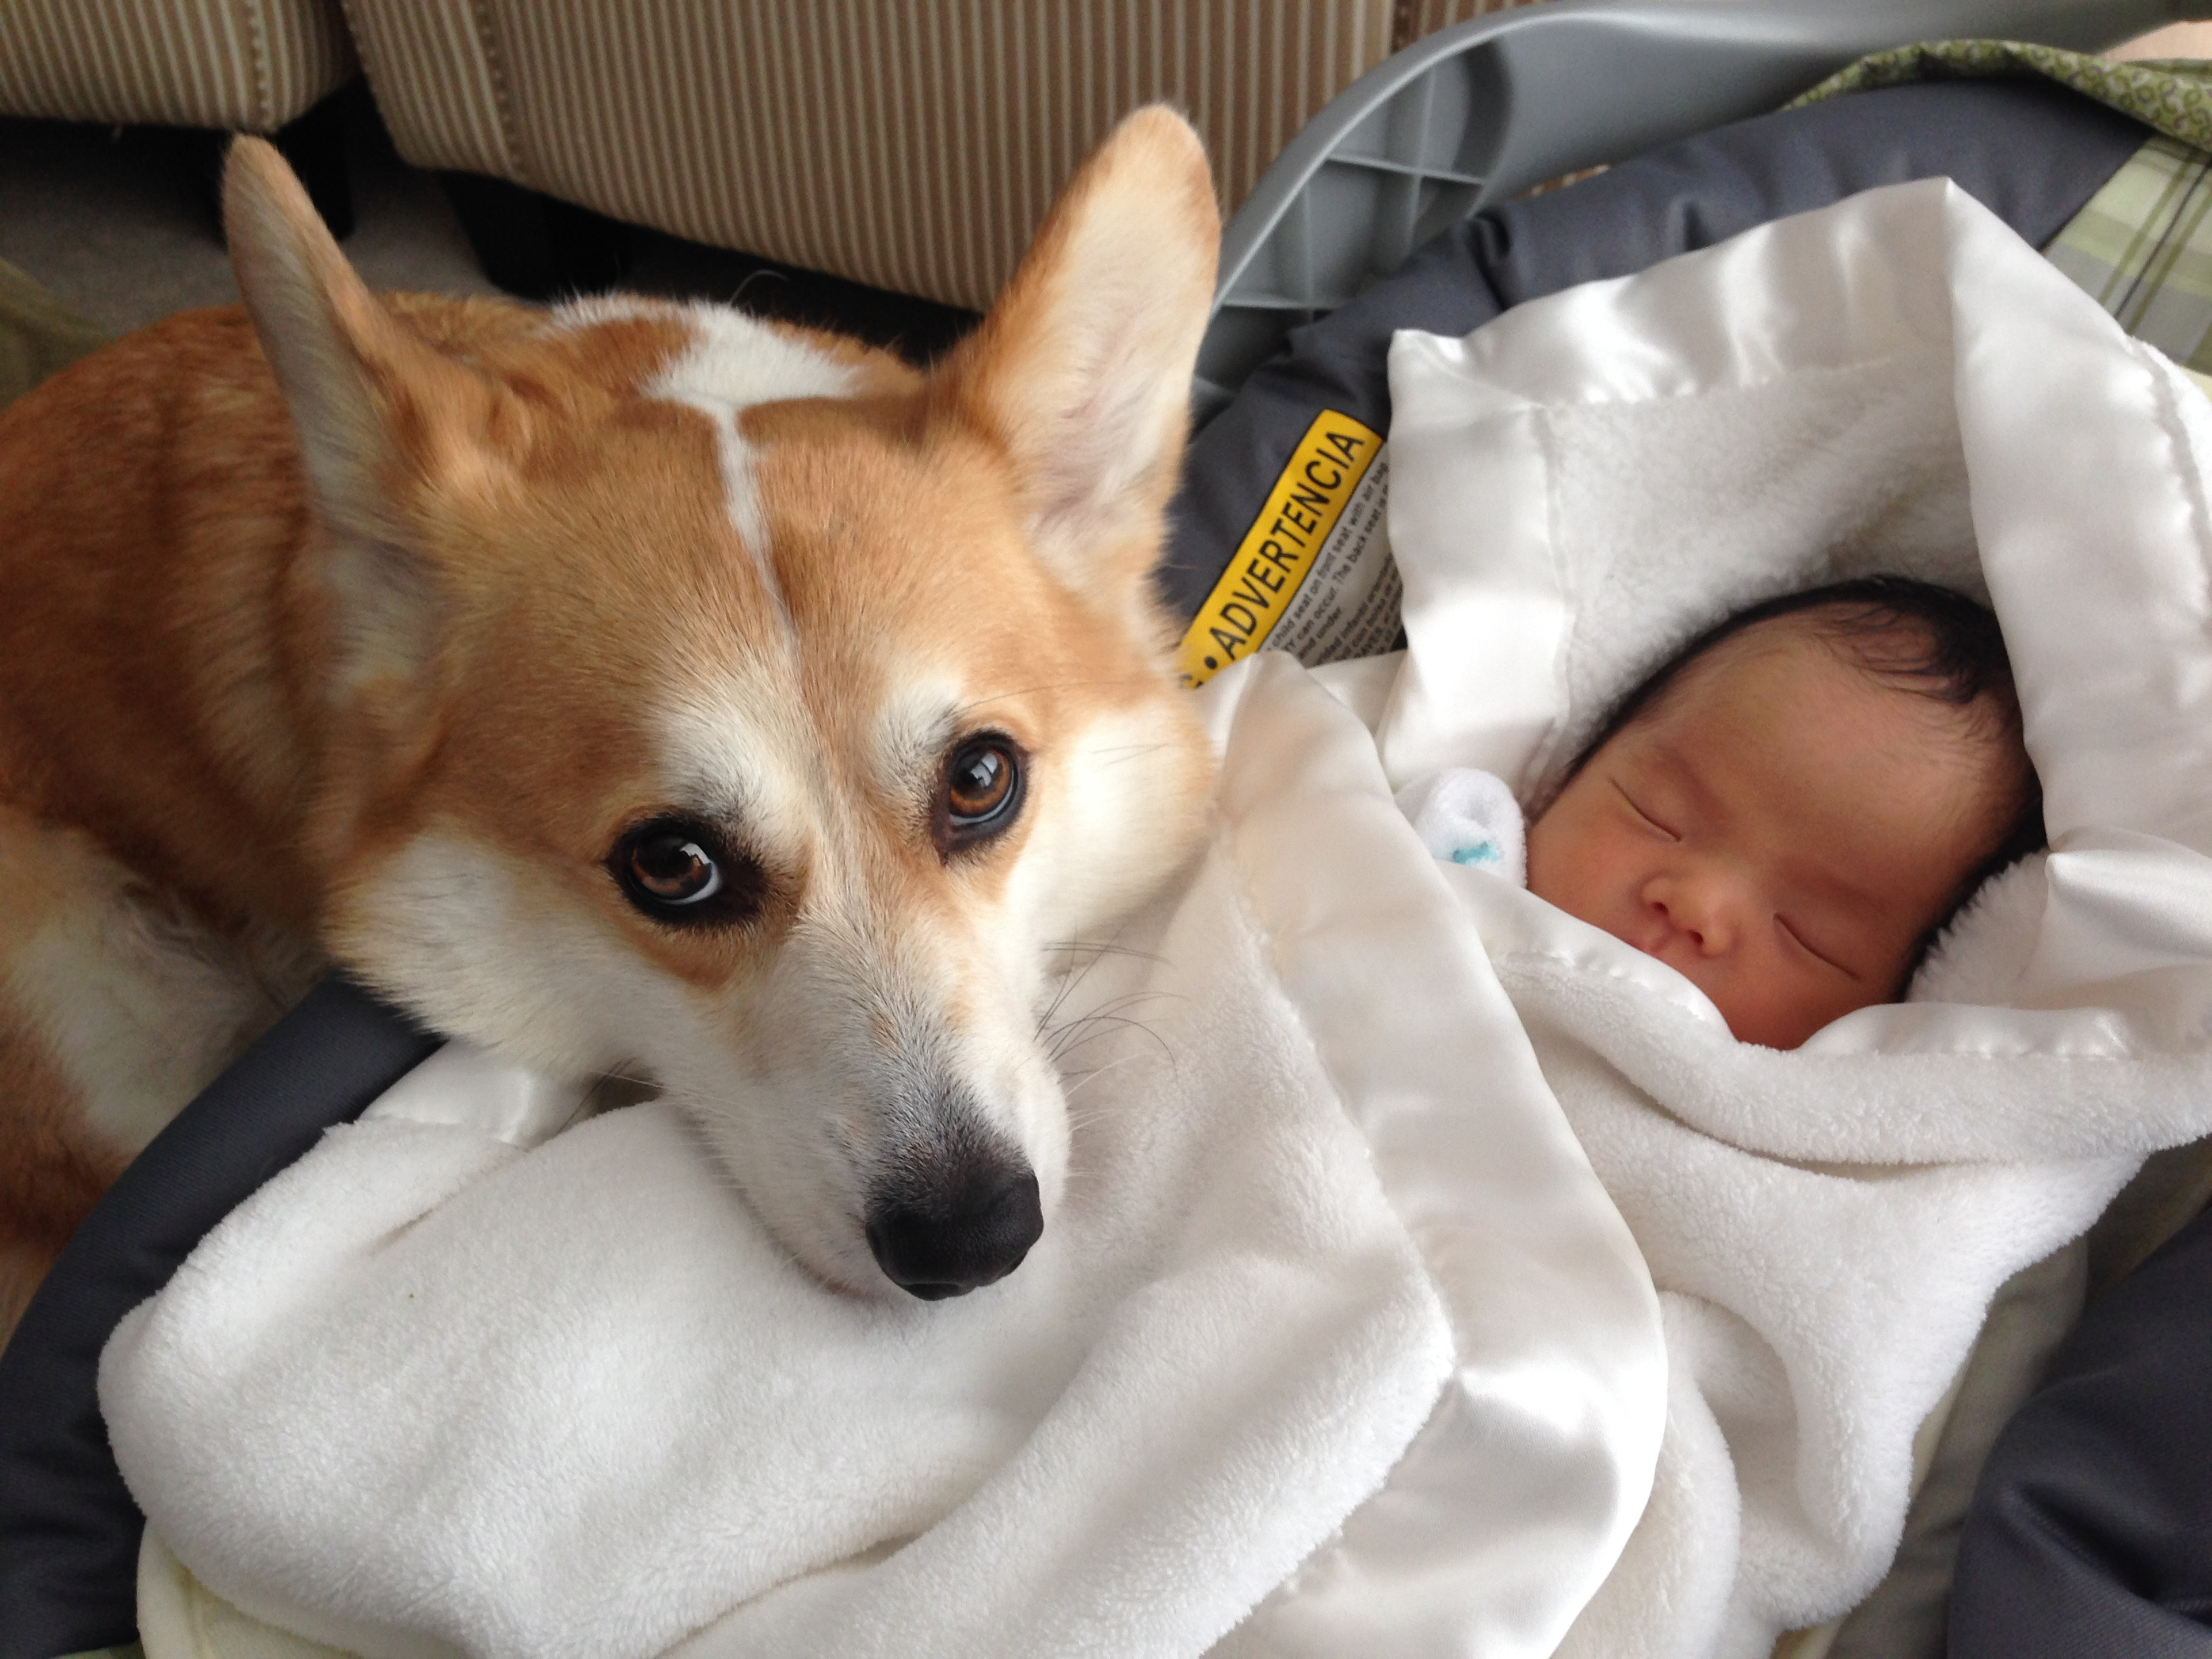 A Corgi sitting on the floor with its head next to the new born baby